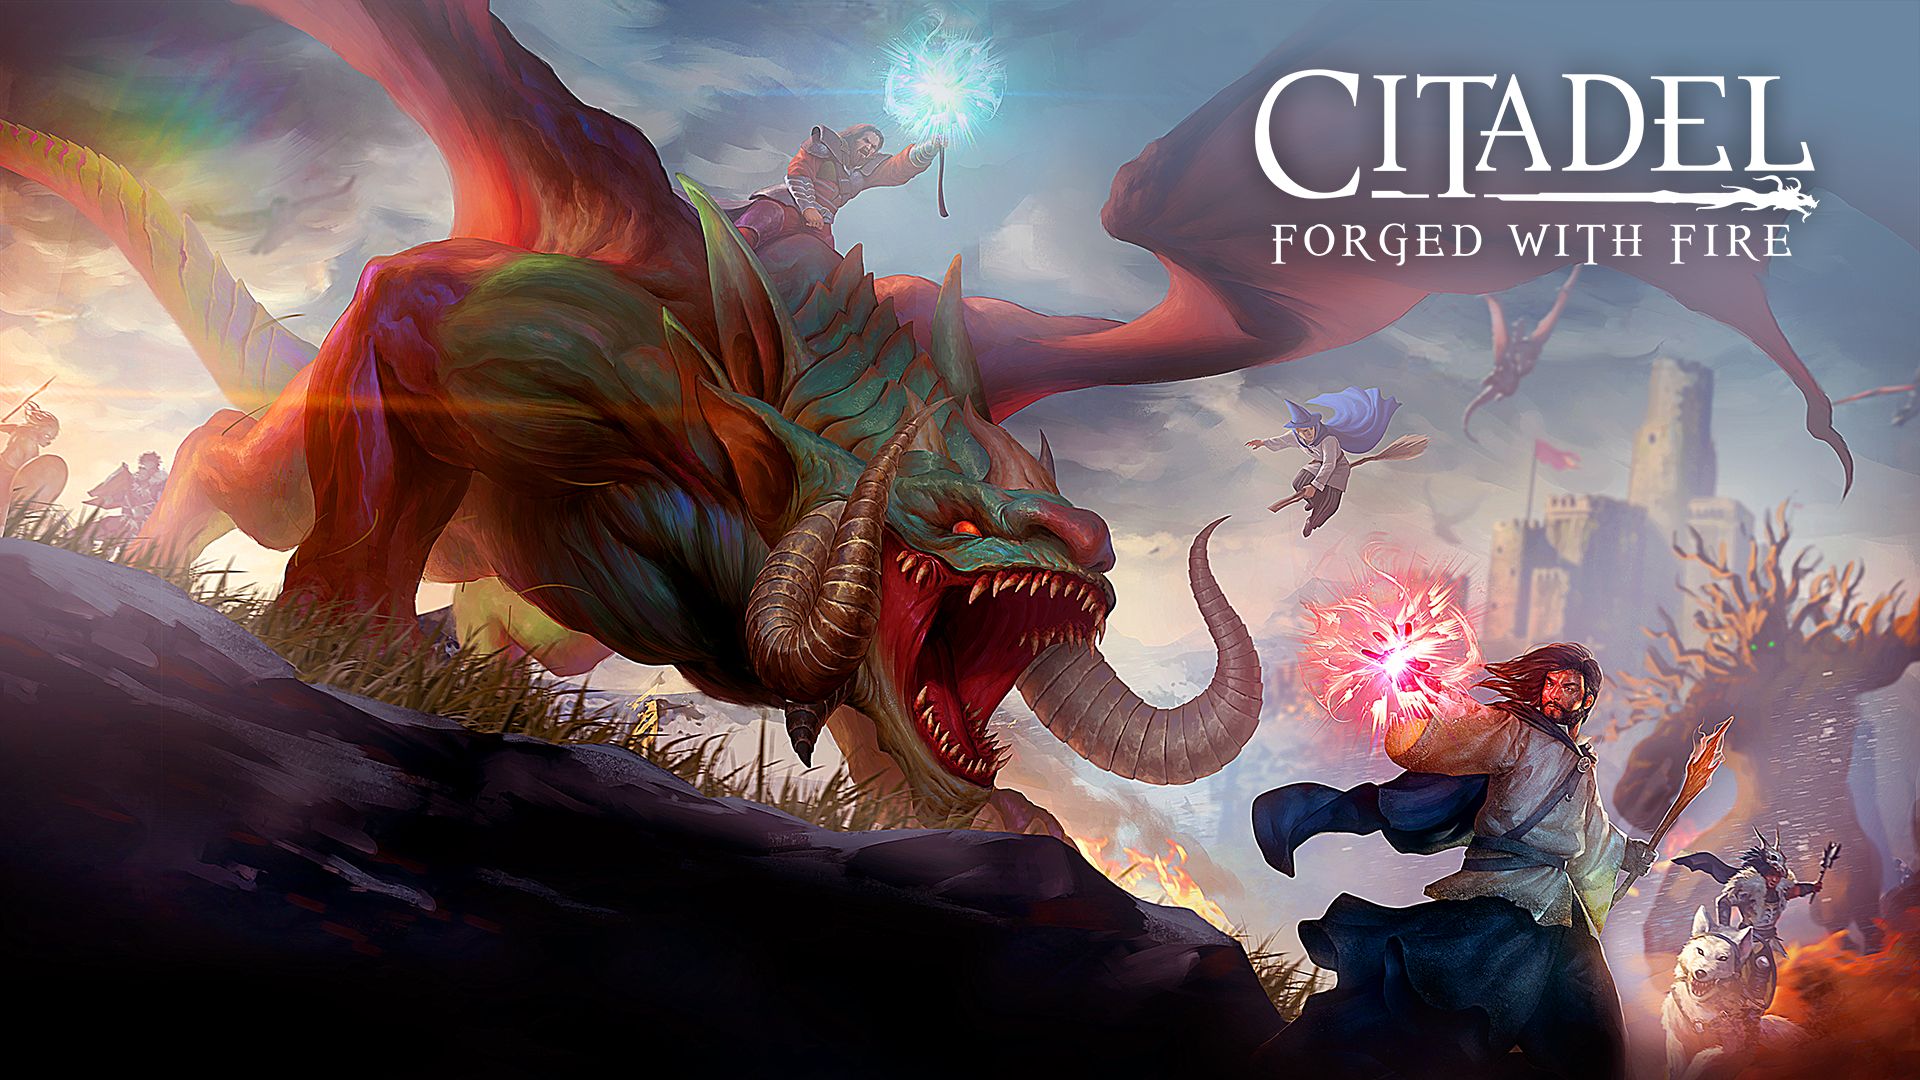 Broomsticks, Wizards, and Spells Collide in the Magical World of Citadel: Forged with Fire, Available Now on Xbox One